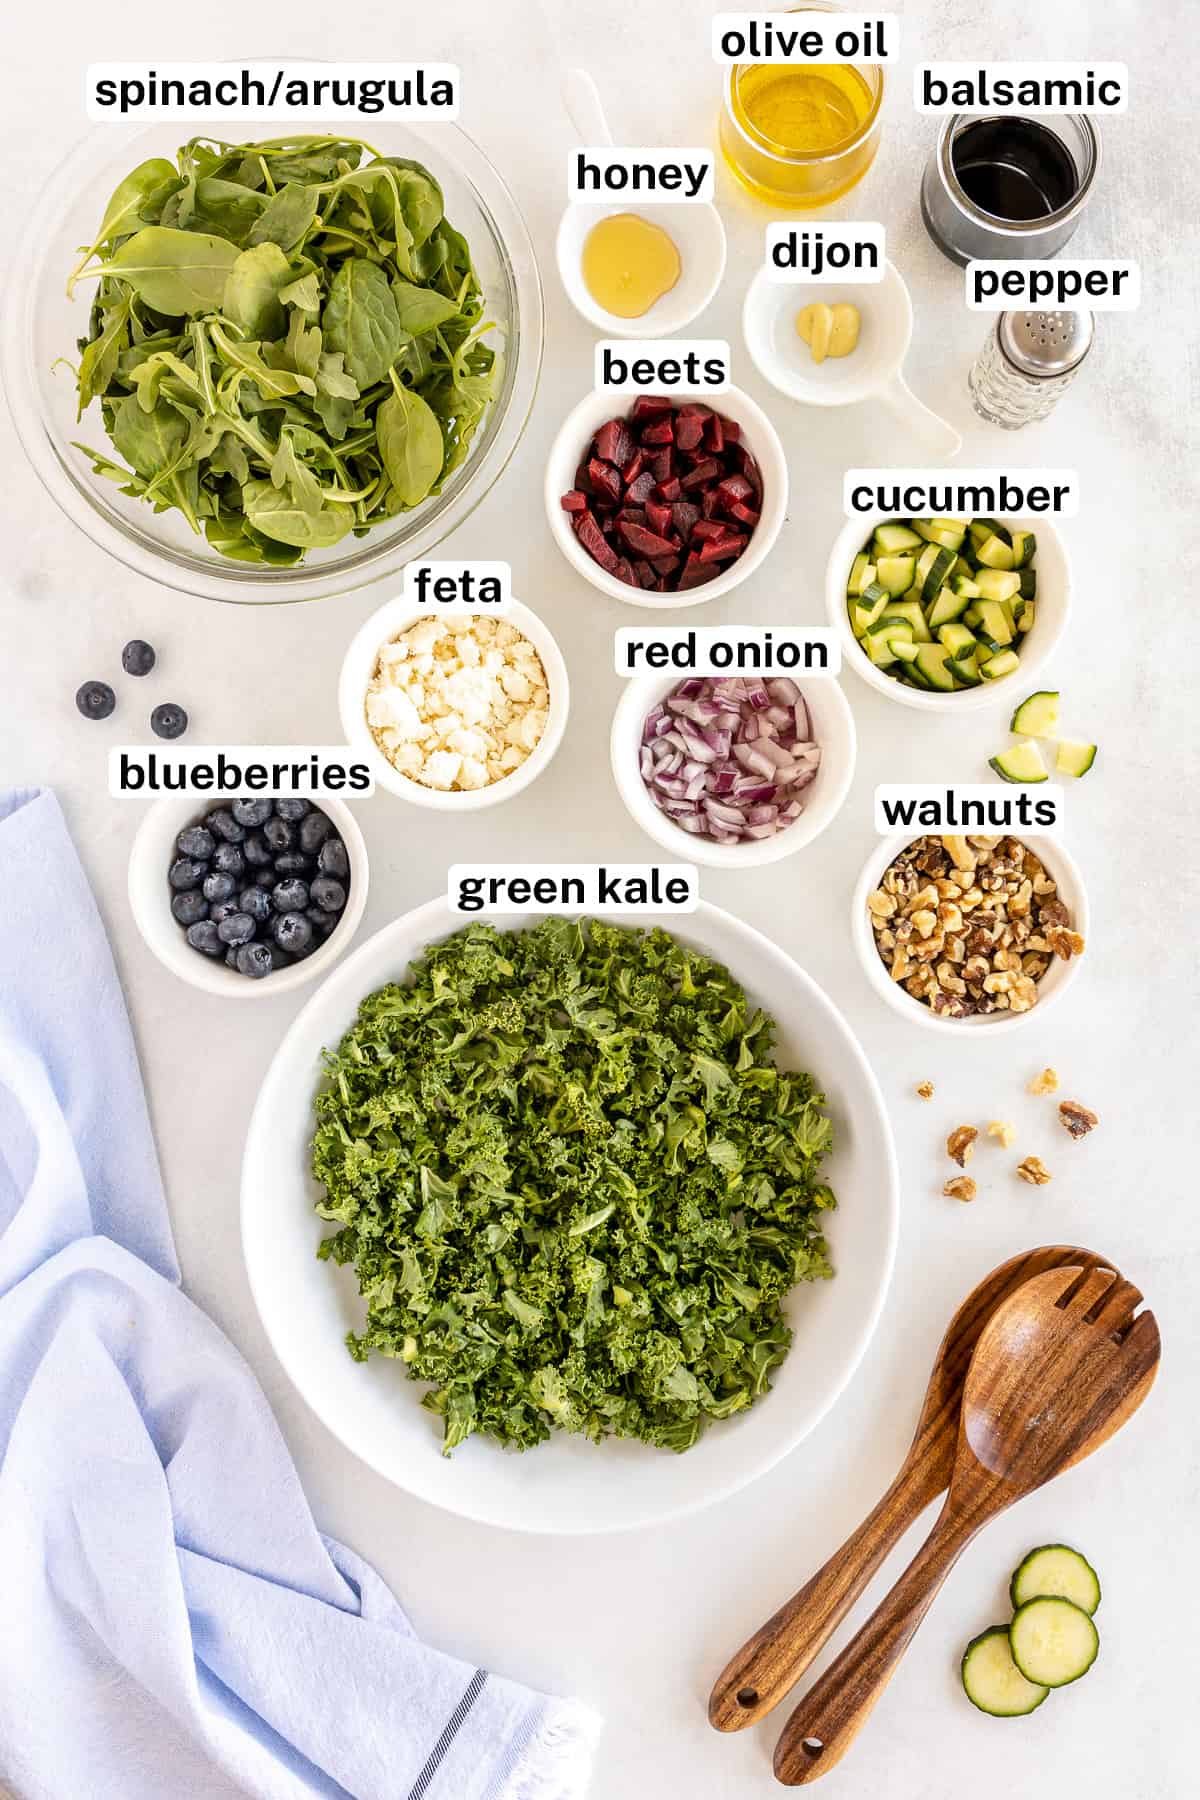 The ingredients for Blueberry Beet Salad with text.